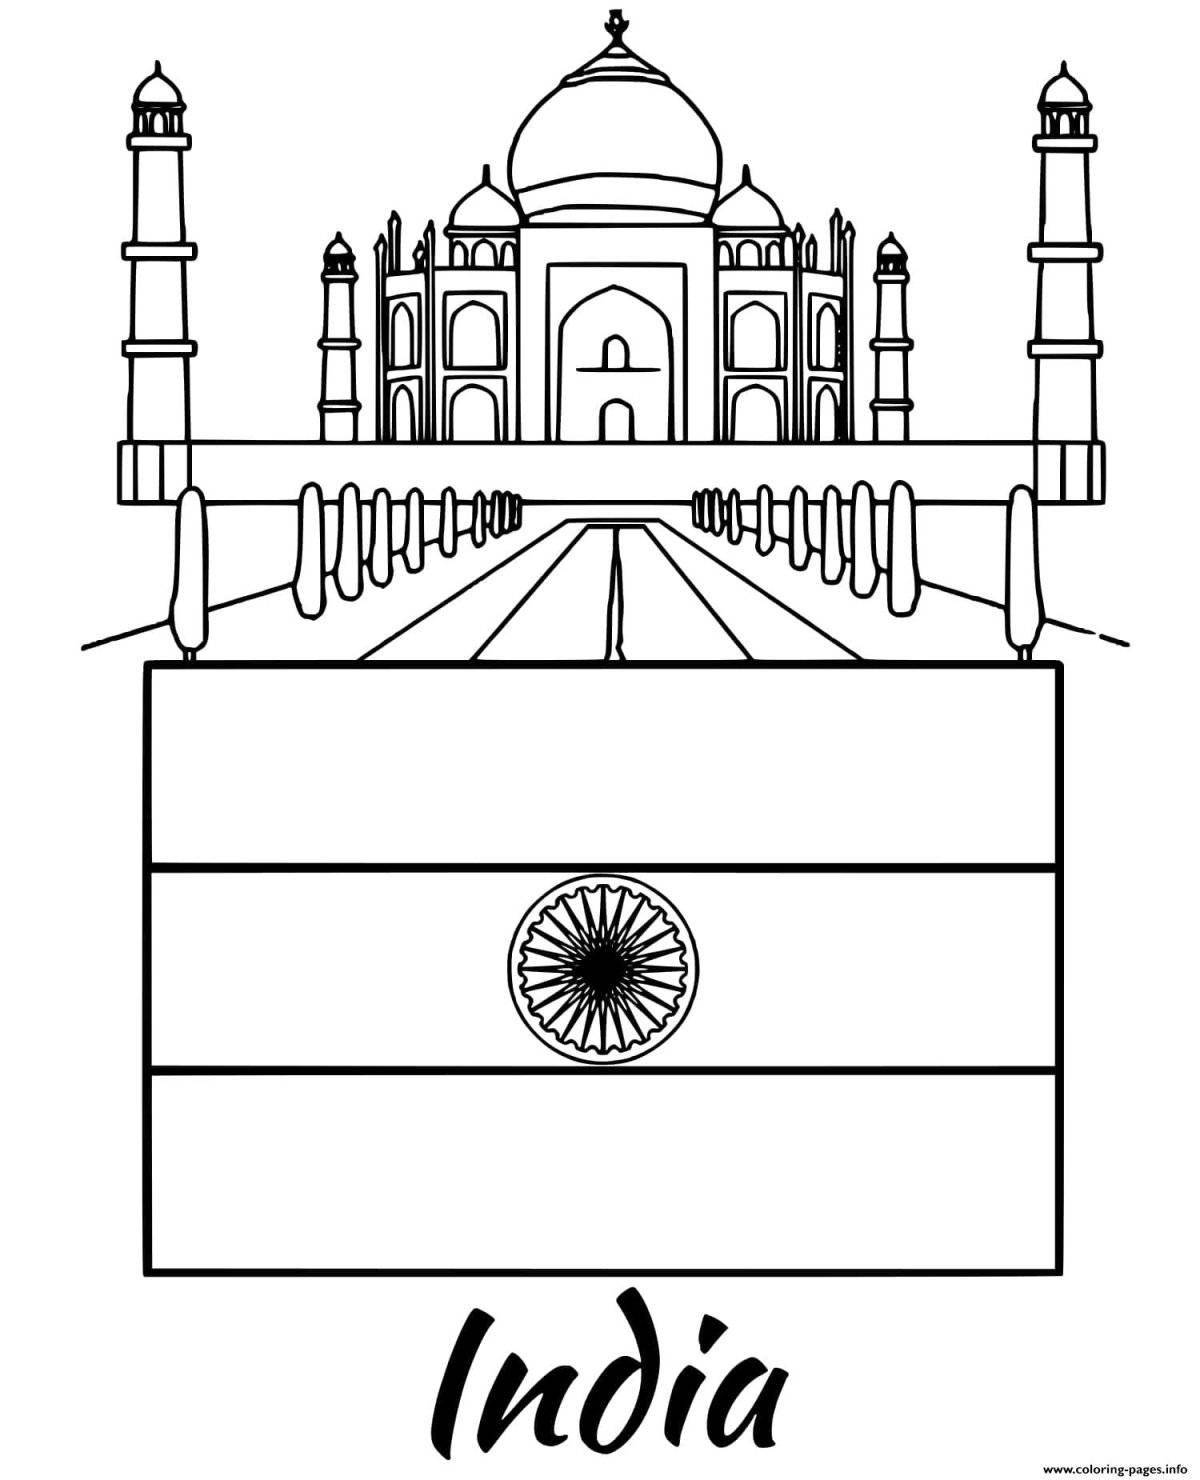 Coloring page festive flag of india